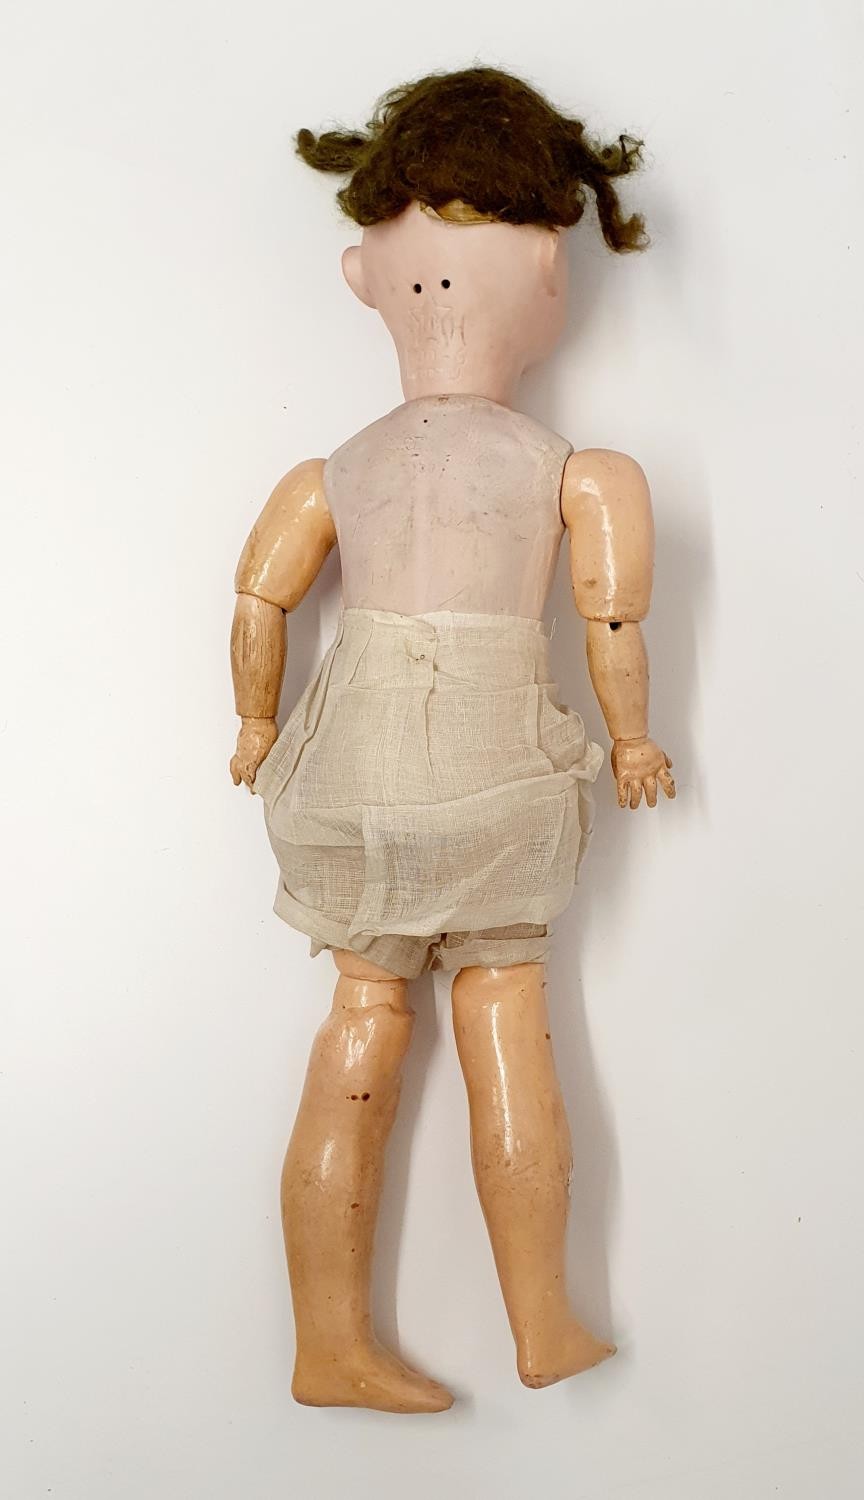 A Simon & Halbig German bisque headed doll, No 1009-6, a composite jointed body, and closing - Image 3 of 4